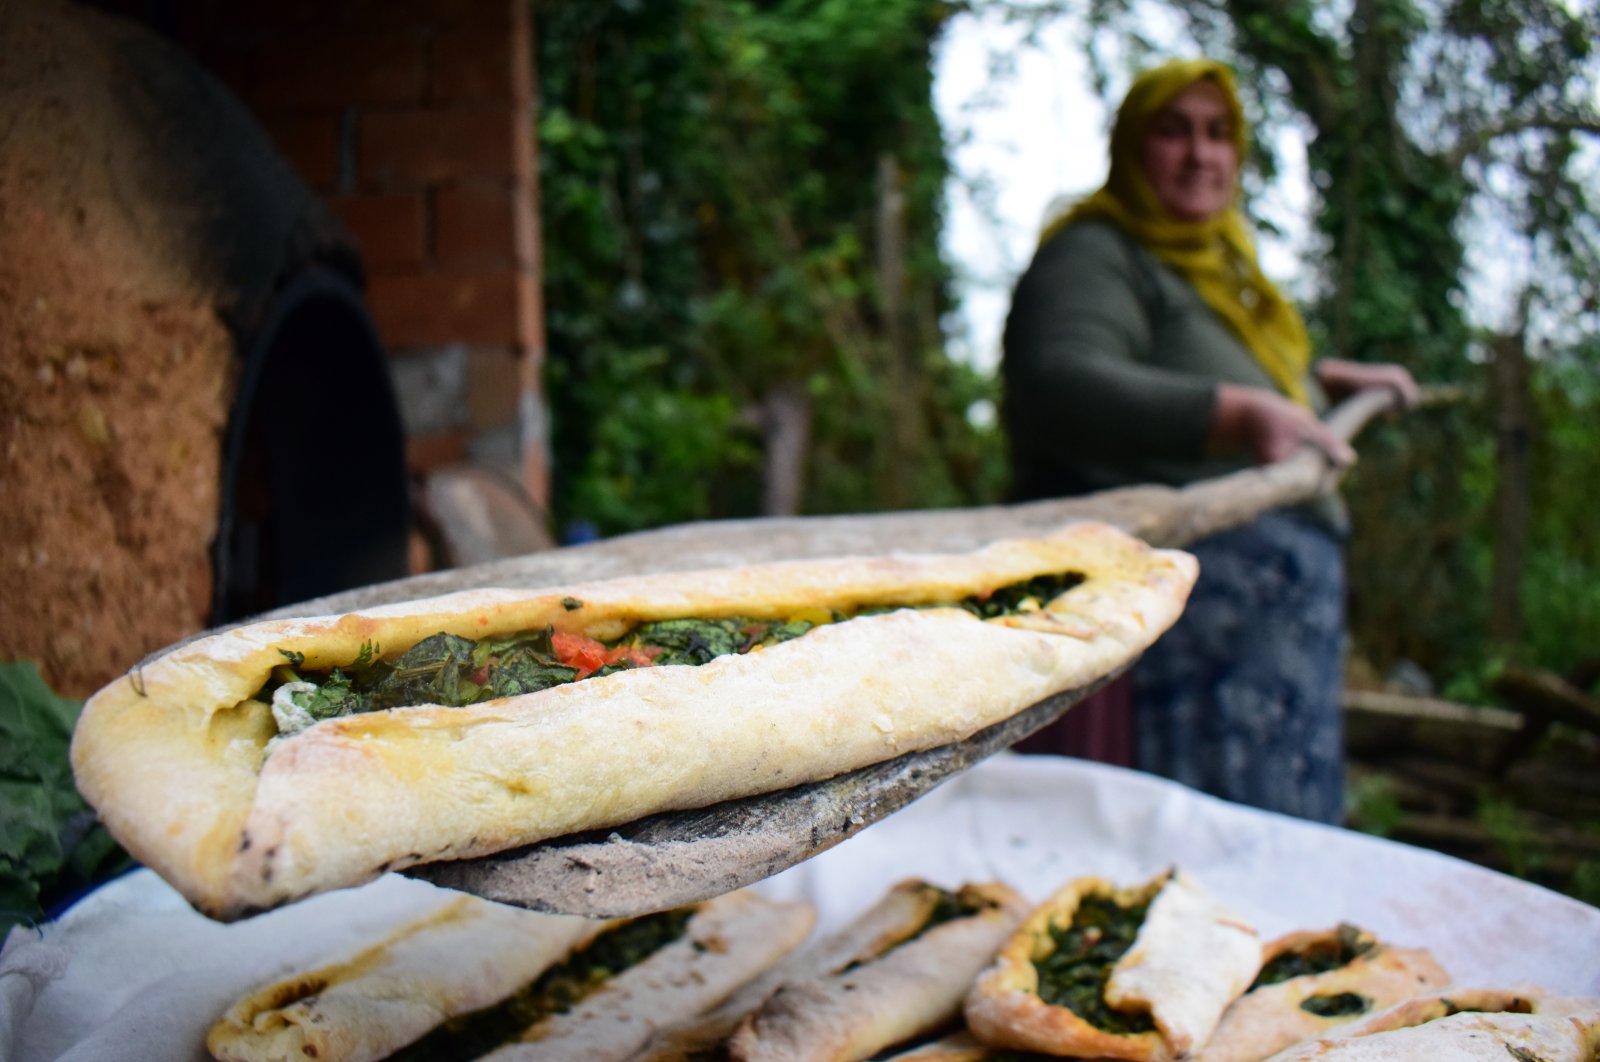 A woman takes a pide filled with collard greens from an earthen oven, in Çayağzı village, Düzce province, Turkey, April 26, 2020. (AA Photo)